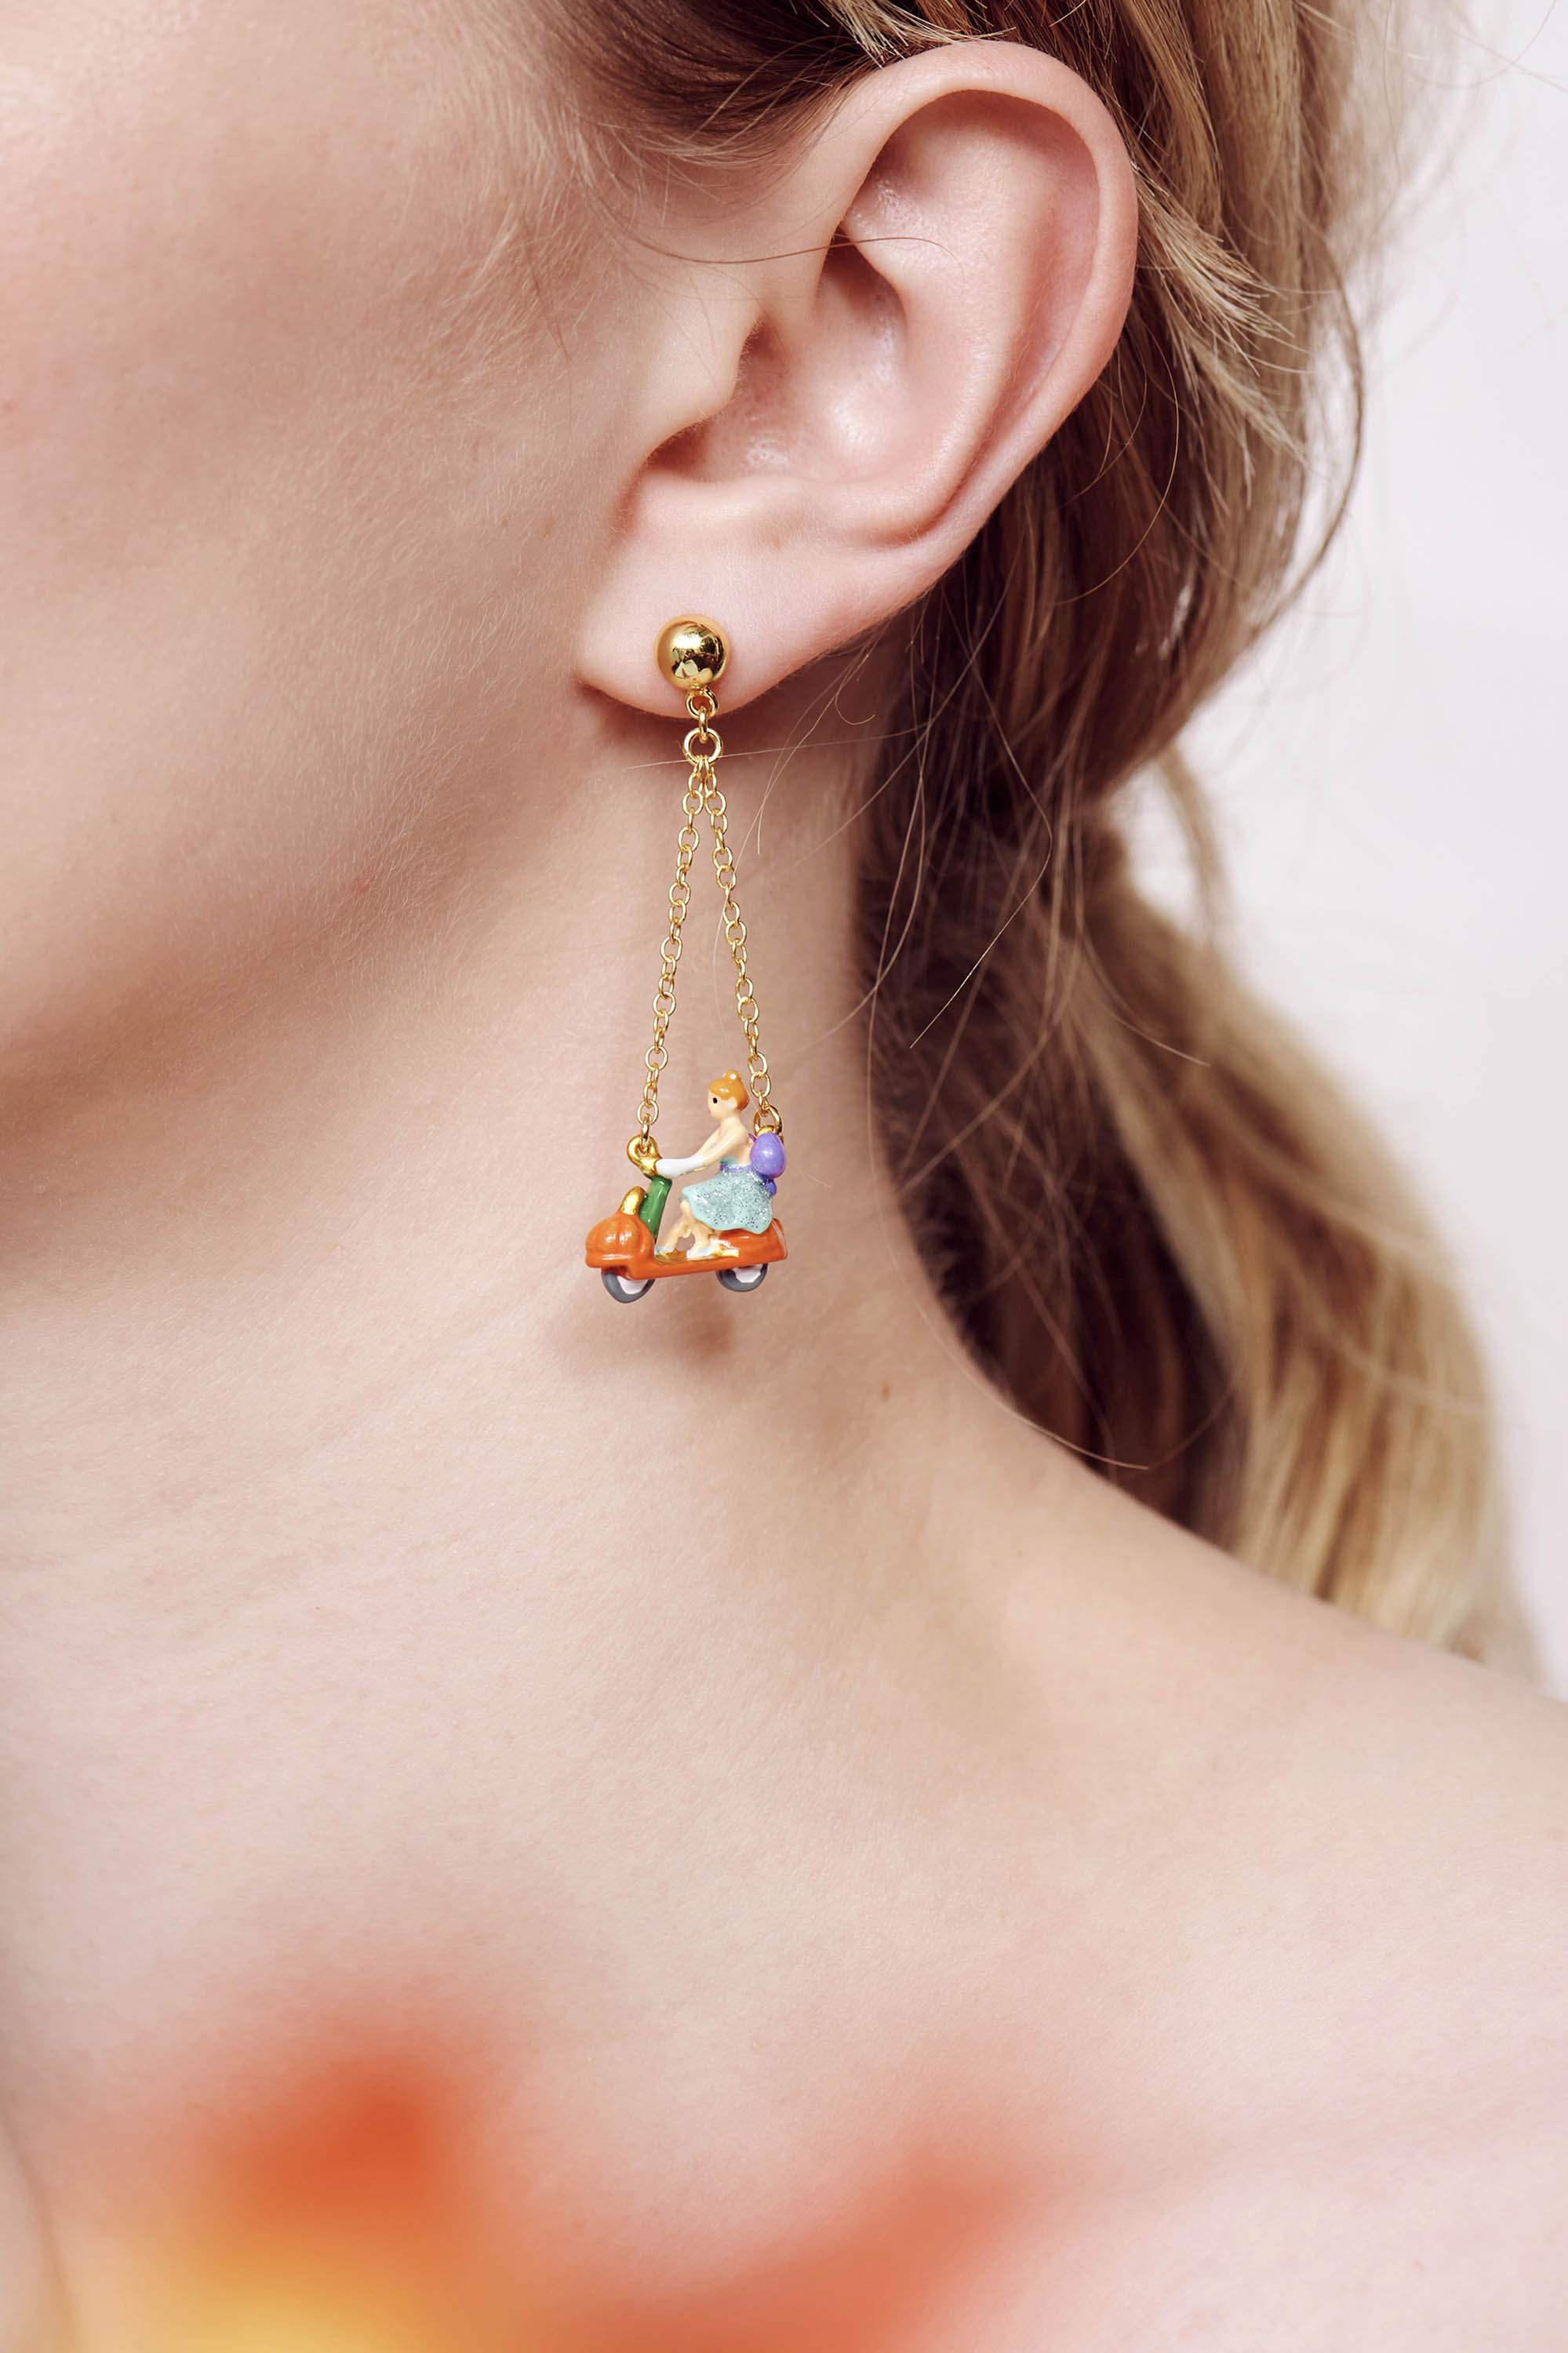 Cinderella and Pumpkin Scooter clip-on earrings